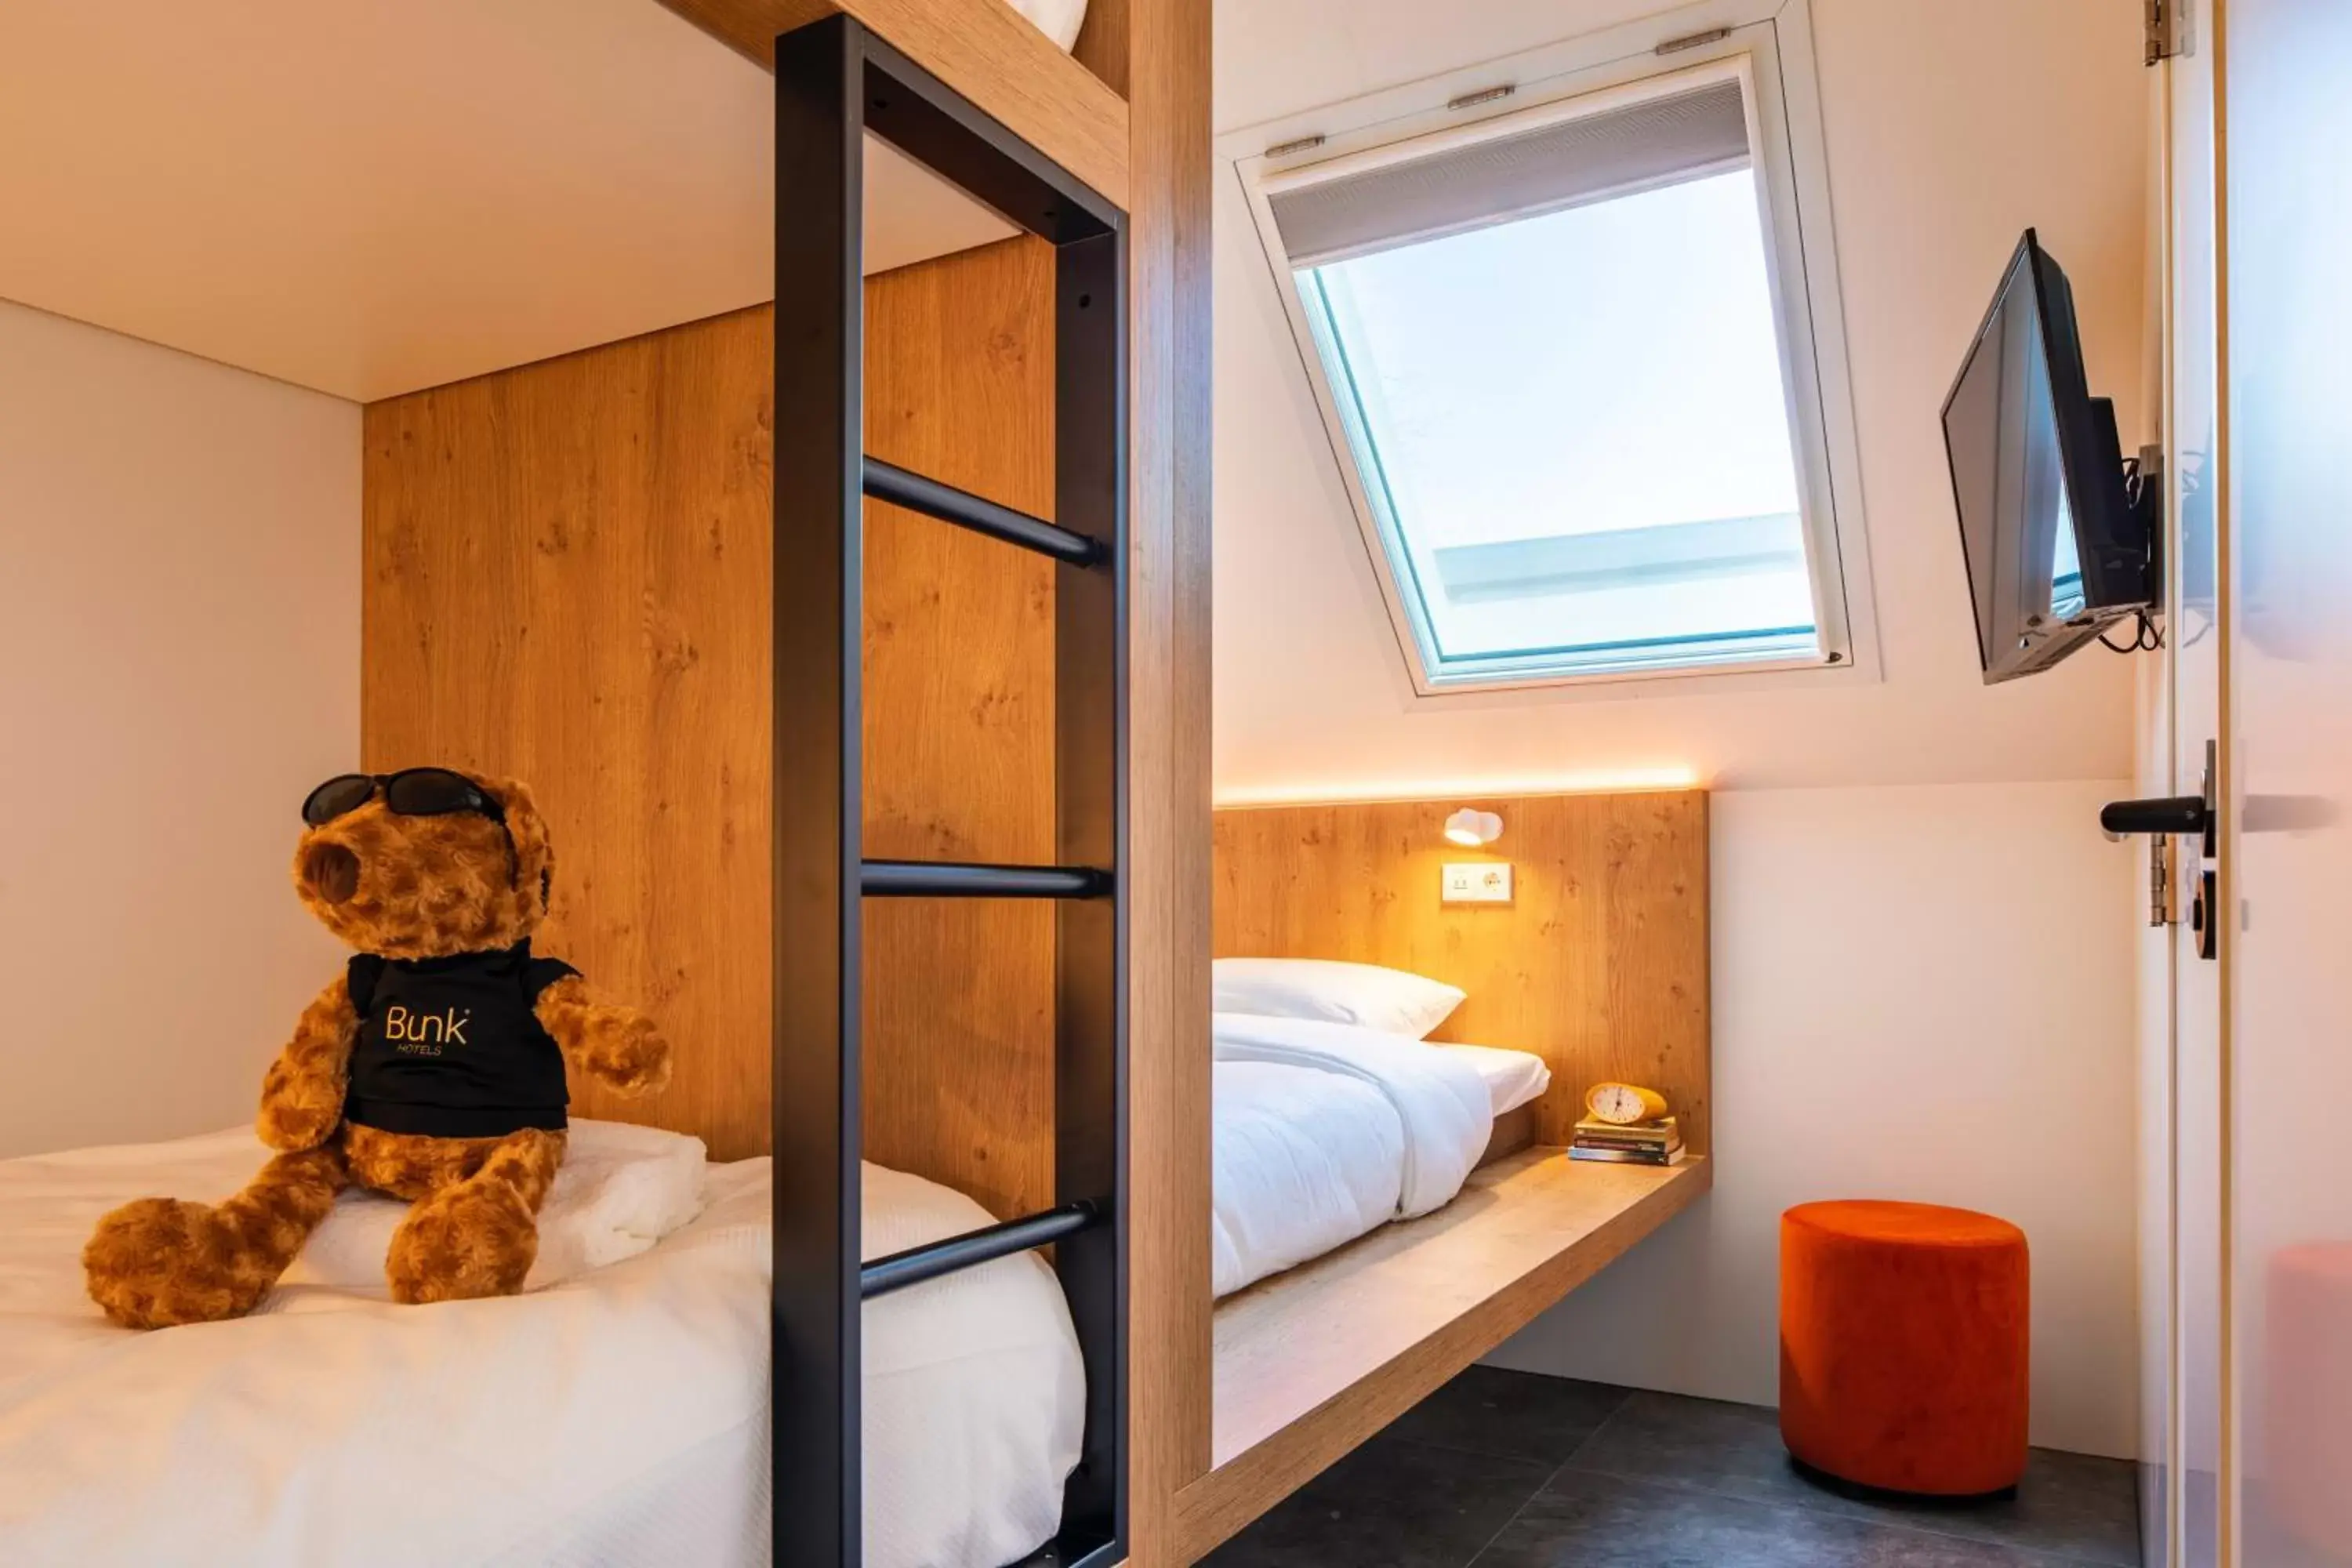 Bed in Bunk Hotel Amsterdam